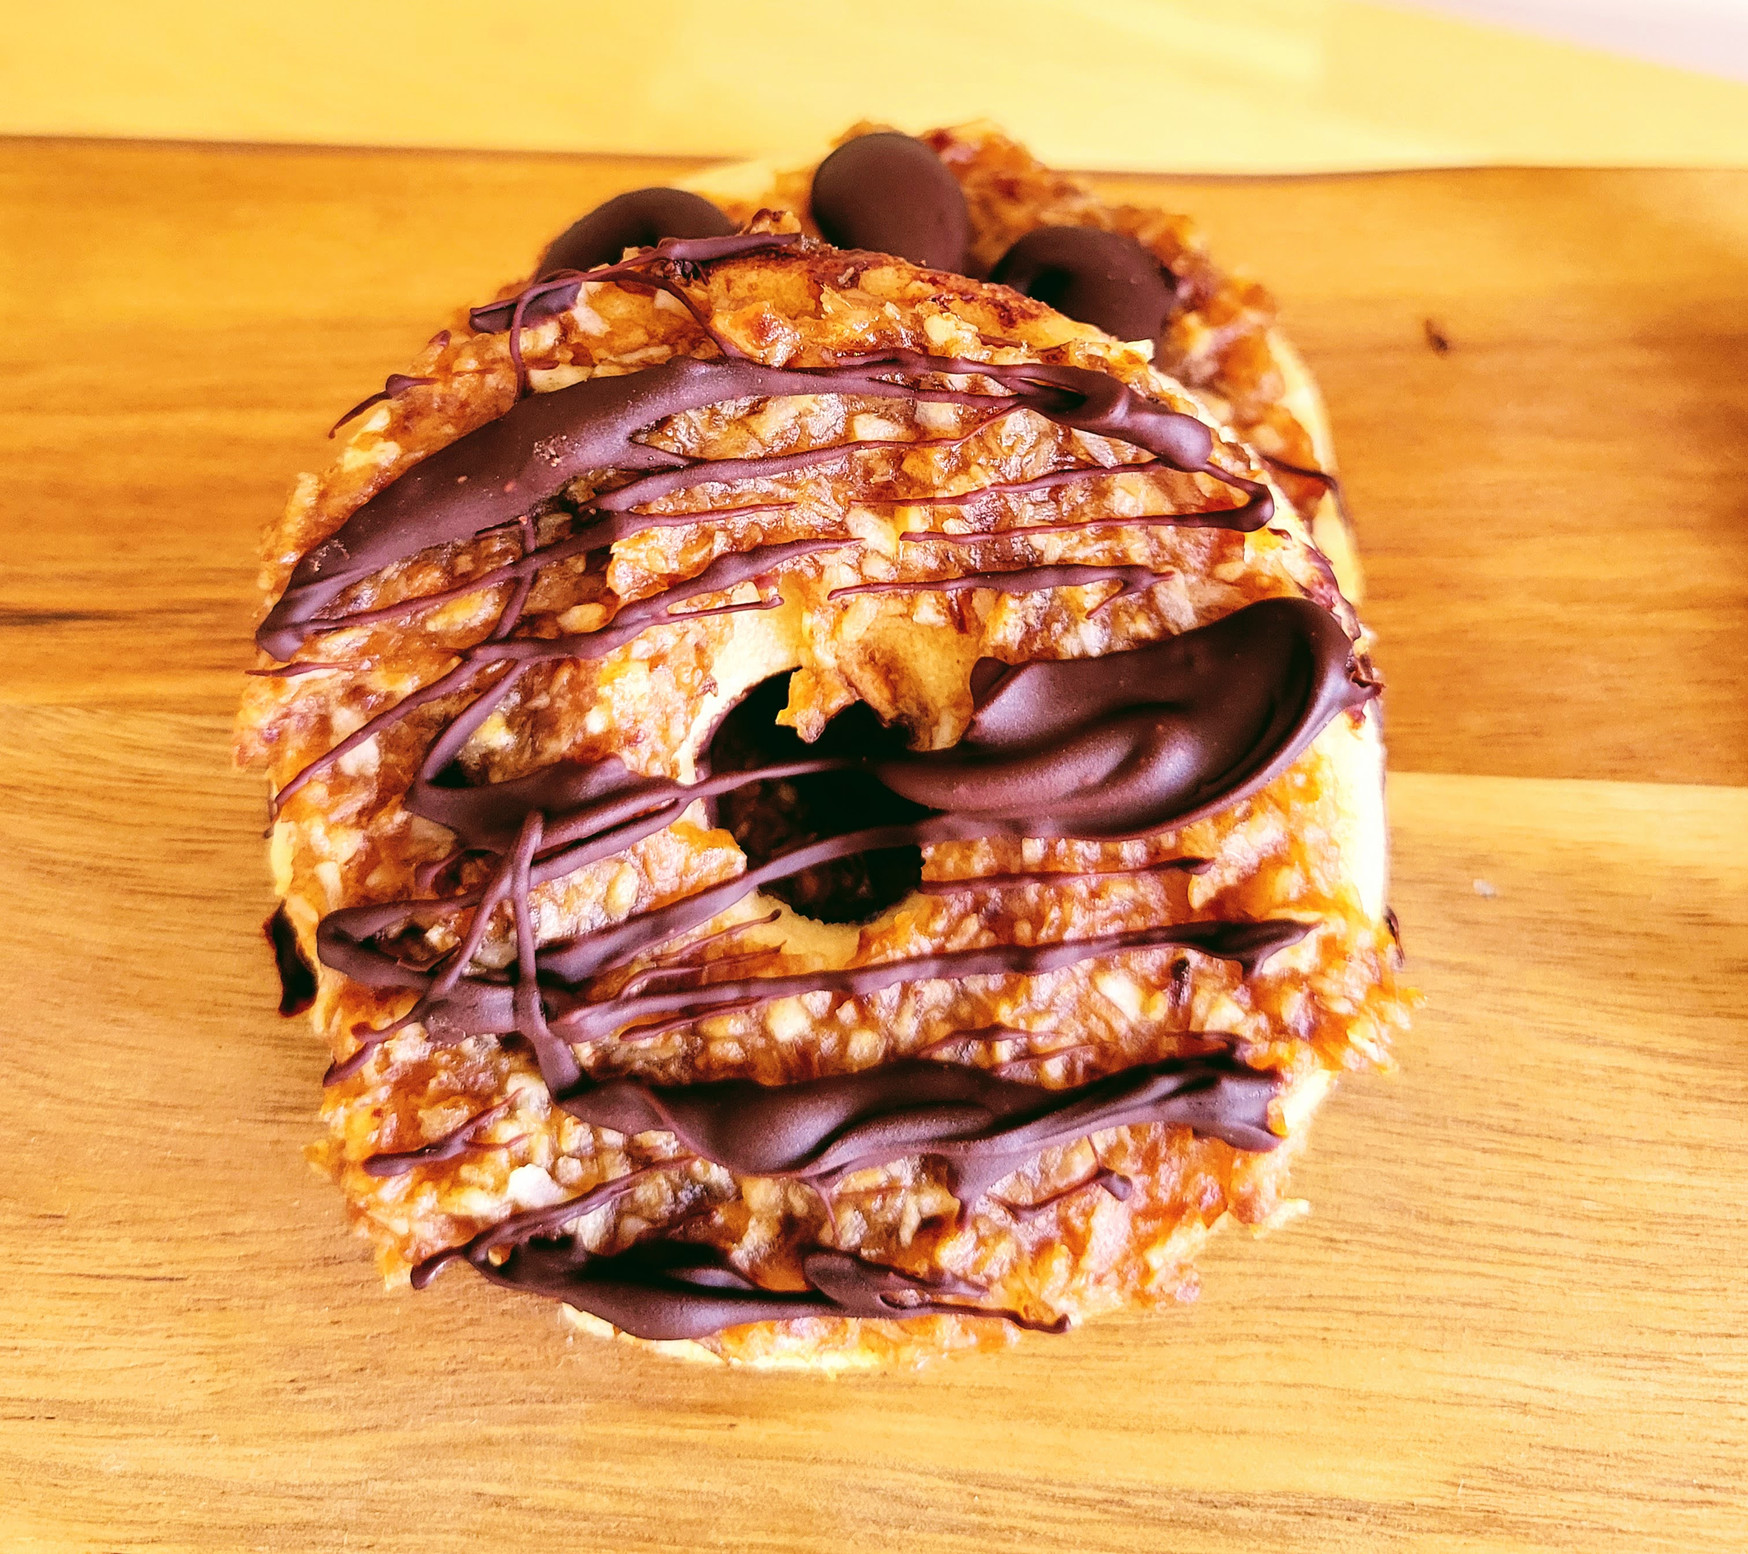 healthy samoas girl scout cookie closeup on a wooden cutting board